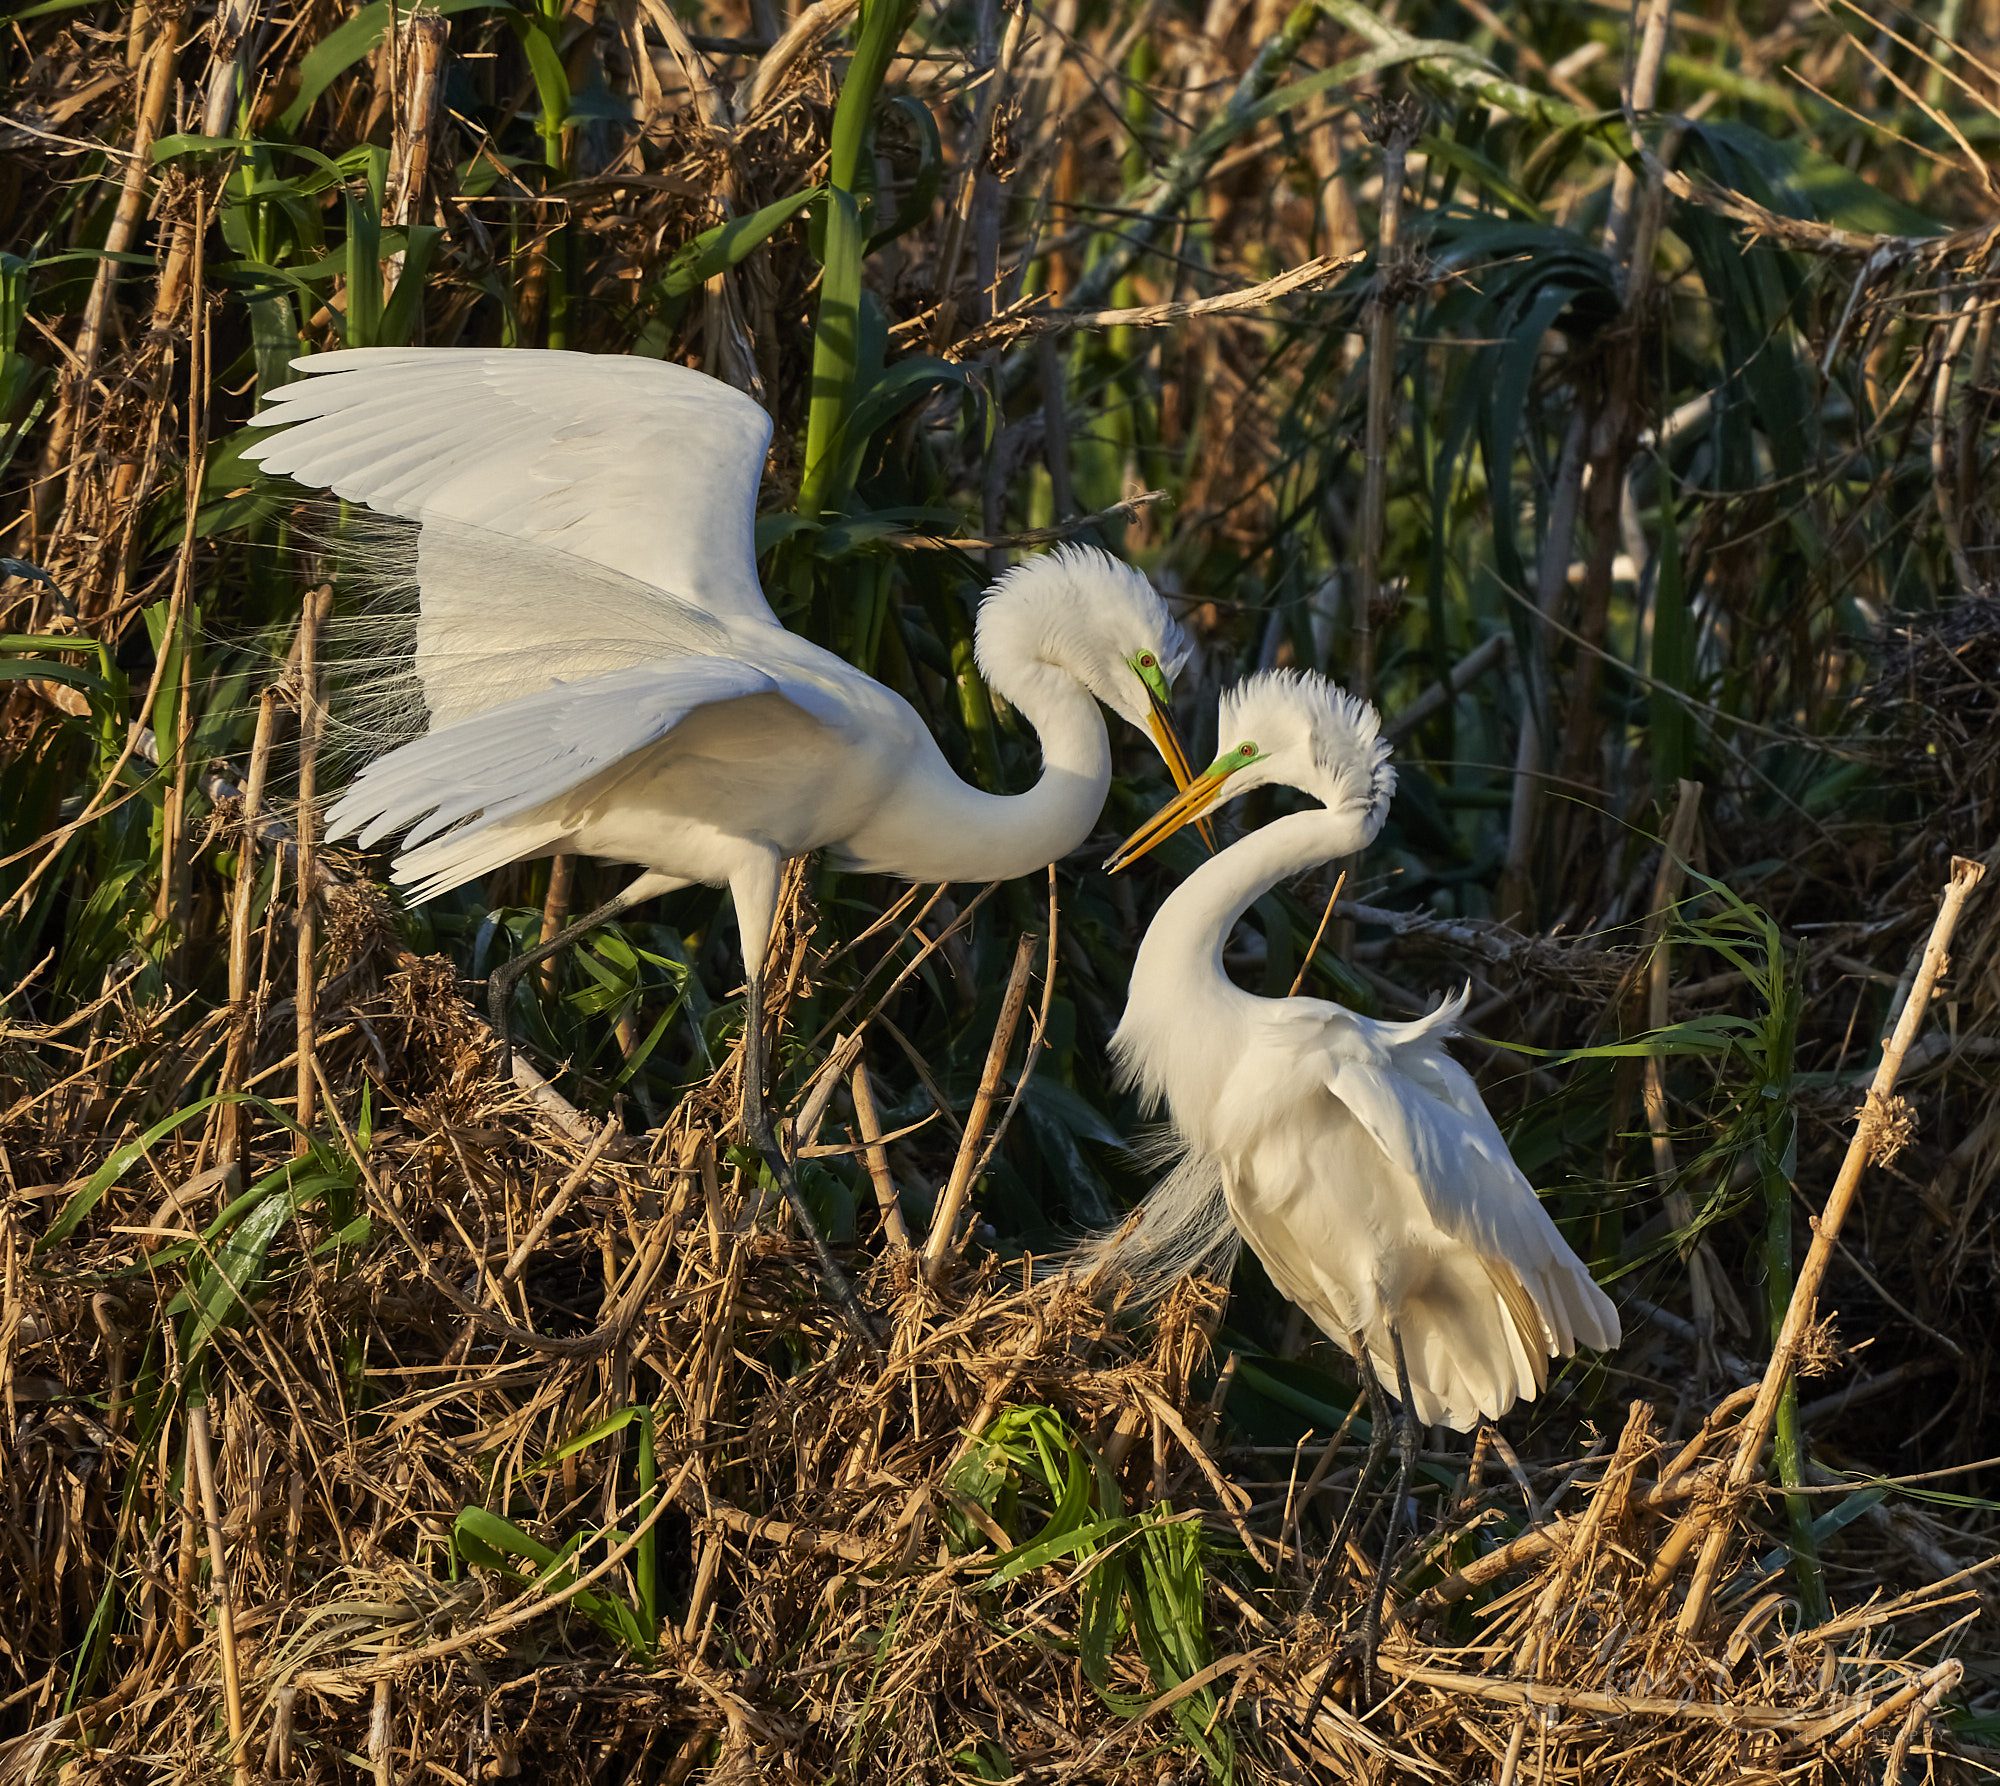 Pair of mating Egrets